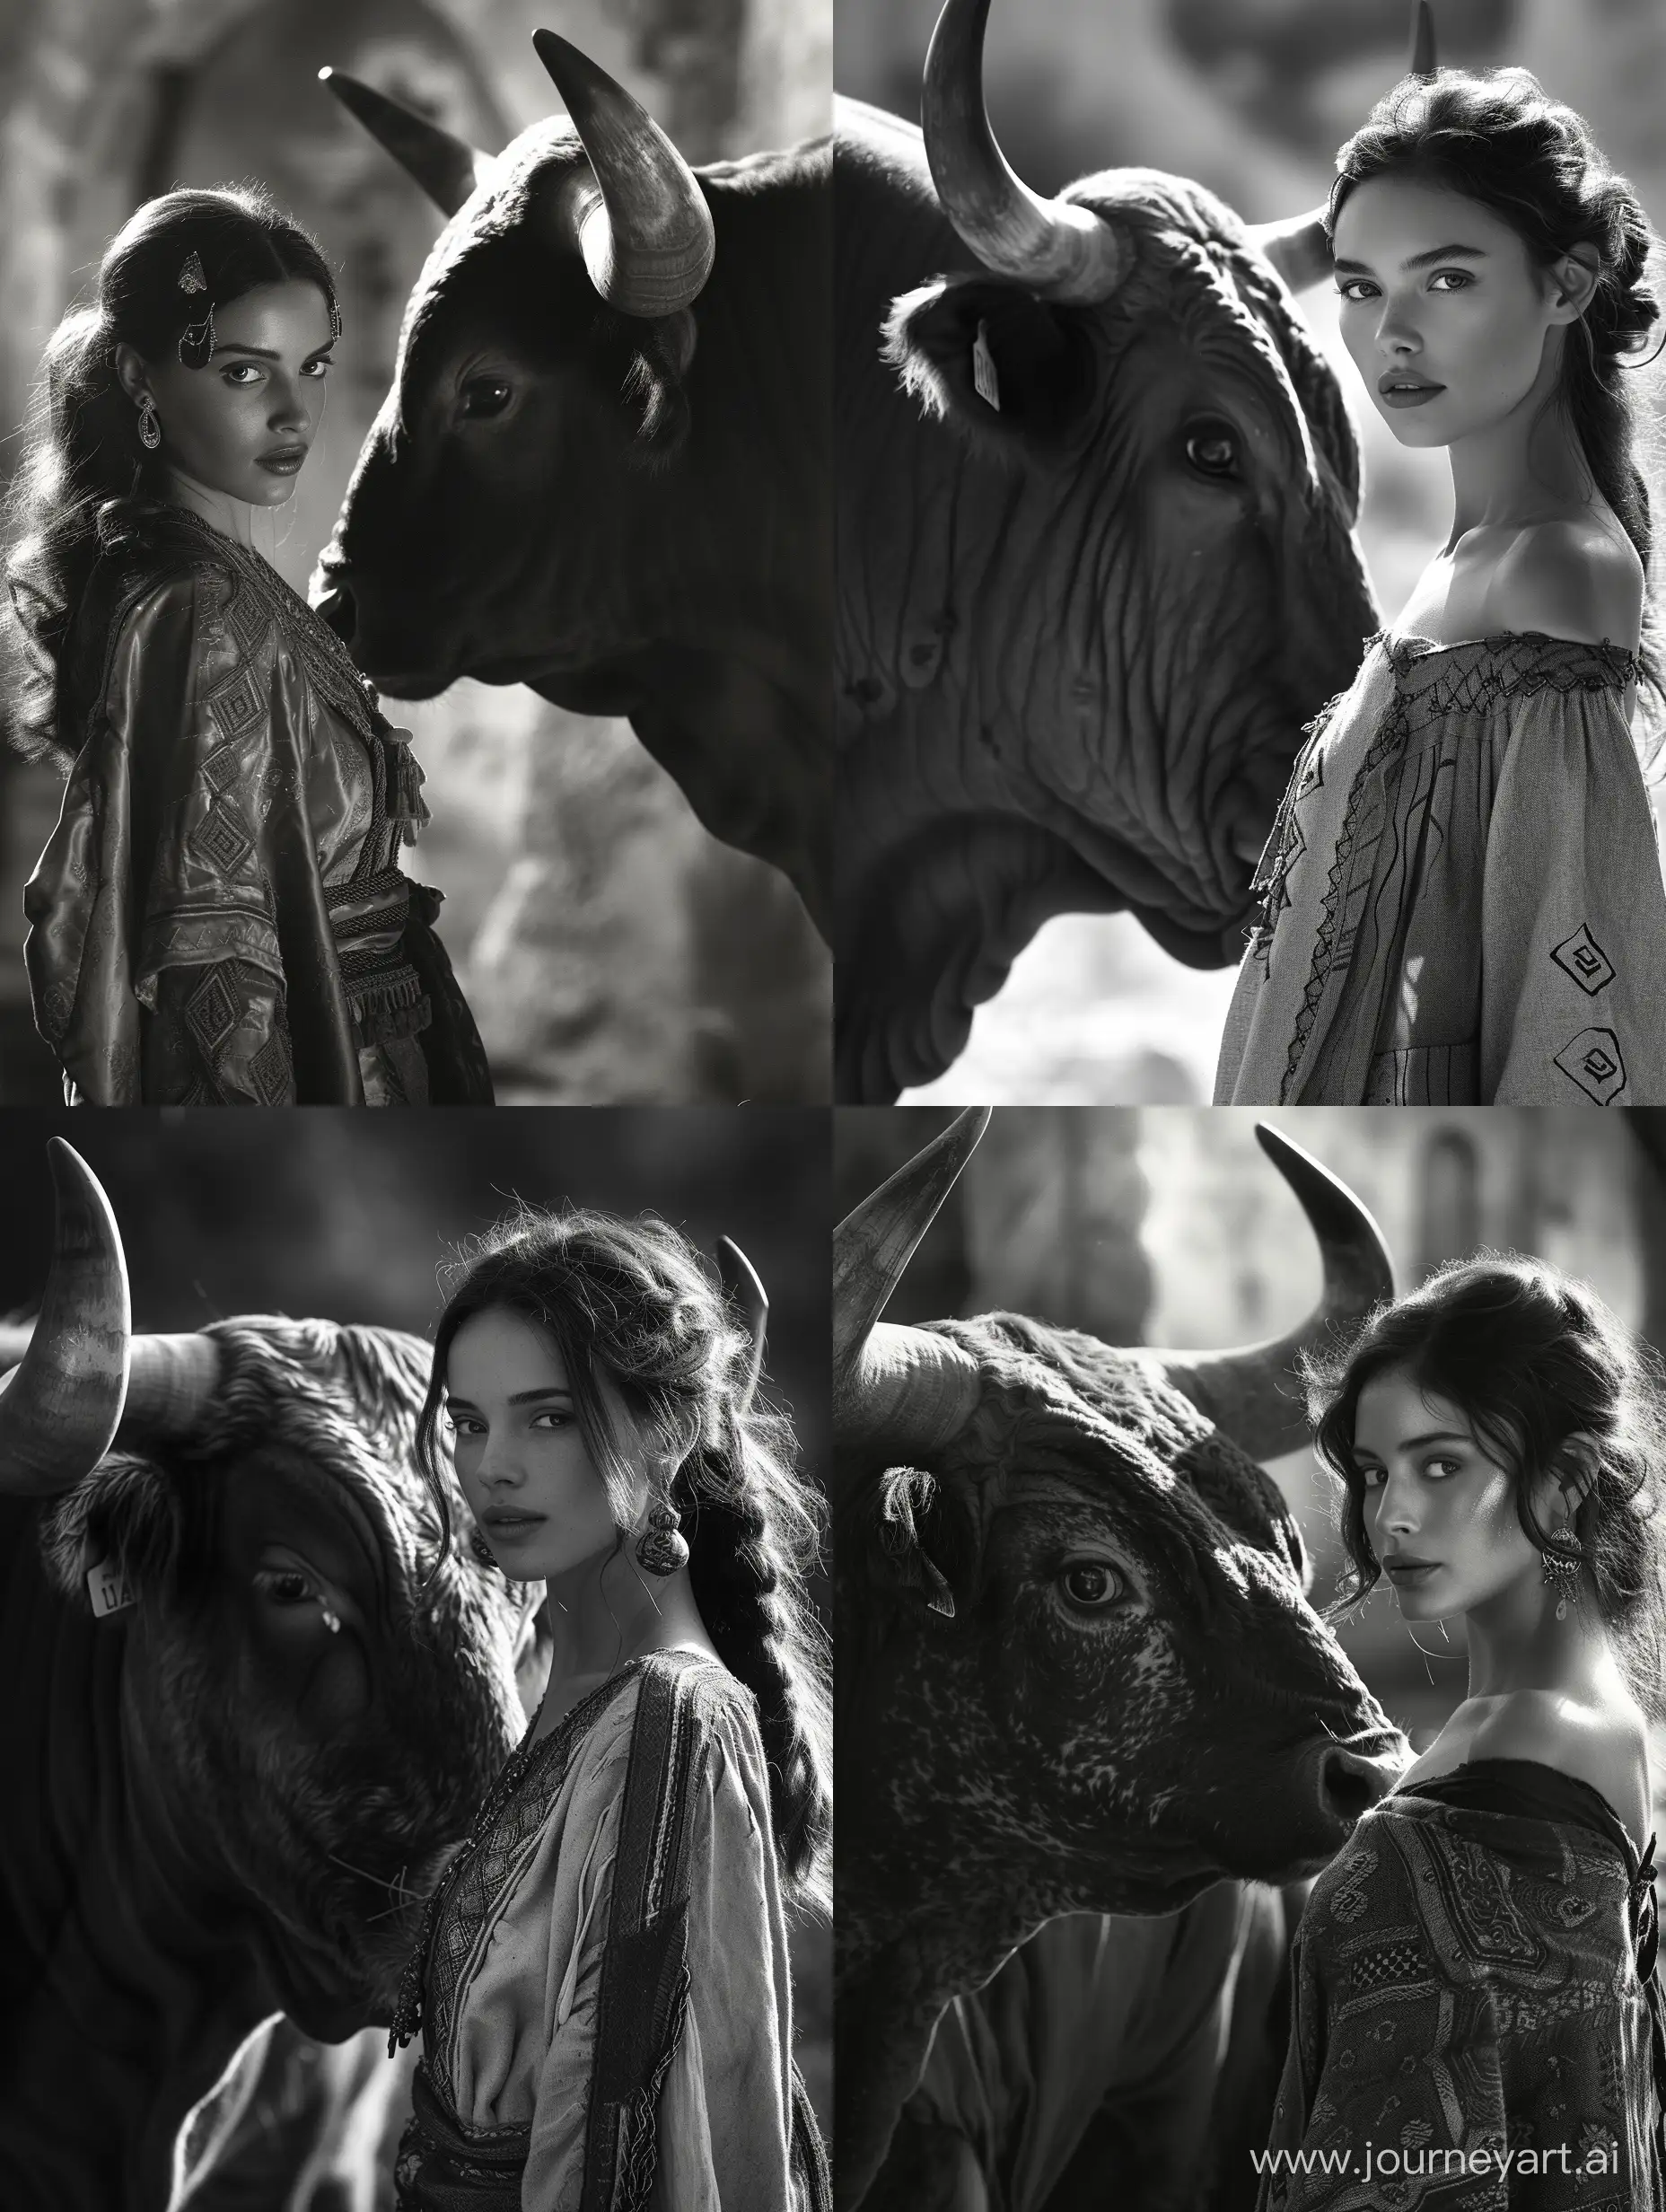 /imagine prompt: A stunning black and white photograph of a beautiful woman dressed in a tunic, standing right next to a horned bull. The woman is captured in a close-up, showing intricate details in her facial features and clothing. The bull is shown in profile, with its horns and muscular build creating strong diagonal lines that draw the viewer's eye towards the center of the image. The lighting is dramatic, with a single light source casting shadows on the woman's face and emphasizing her beauty and the bull's strength. The background is blurred, with a shallow depth of field that emphasizes the focus on the woman and the bull. The composition is dynamic, with the woman and the bull creating a strong contrast between femininity and masculinity. The image has a timeless quality, with the black and white tones adding to the classic and elegant atmosphere of the photograph. It's a perfect fit for those who appreciate the beauty and strength of nature and the human form. 